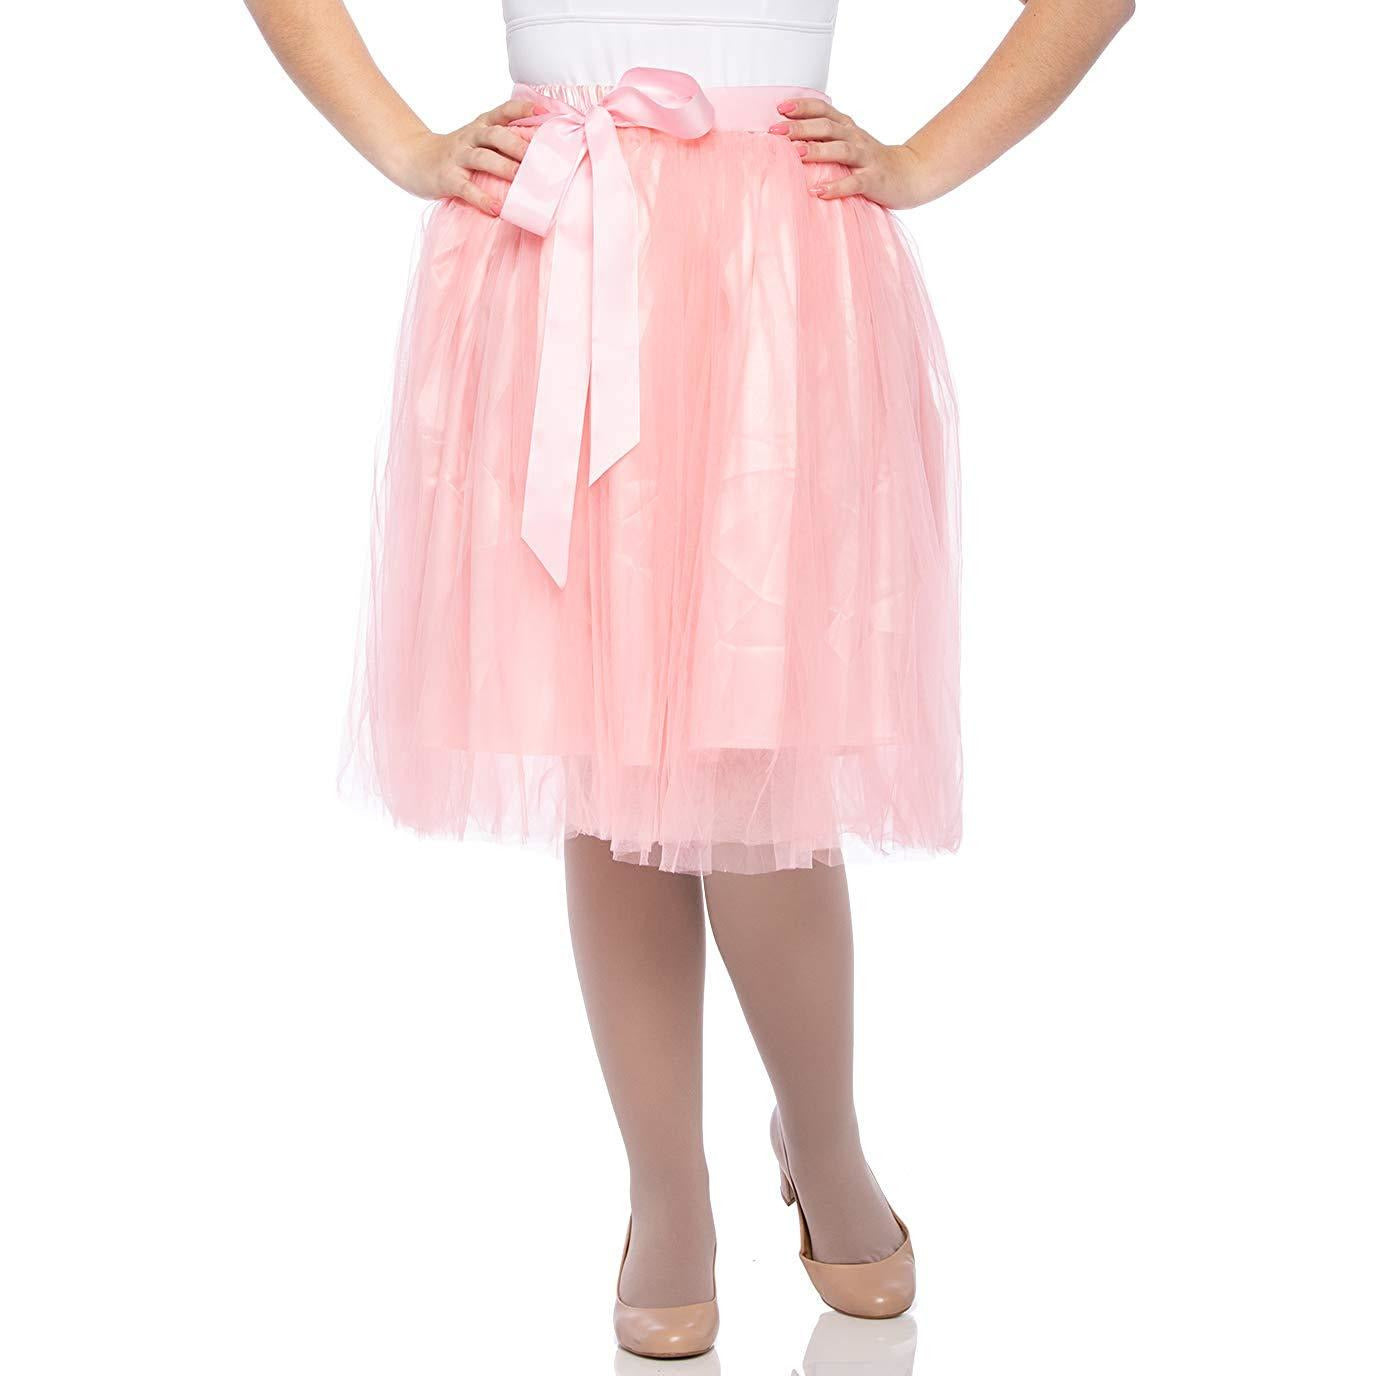 Adults & Girls A-line Knee Length Tutu Tulle Skirt - Regular and Plus Size in Peach